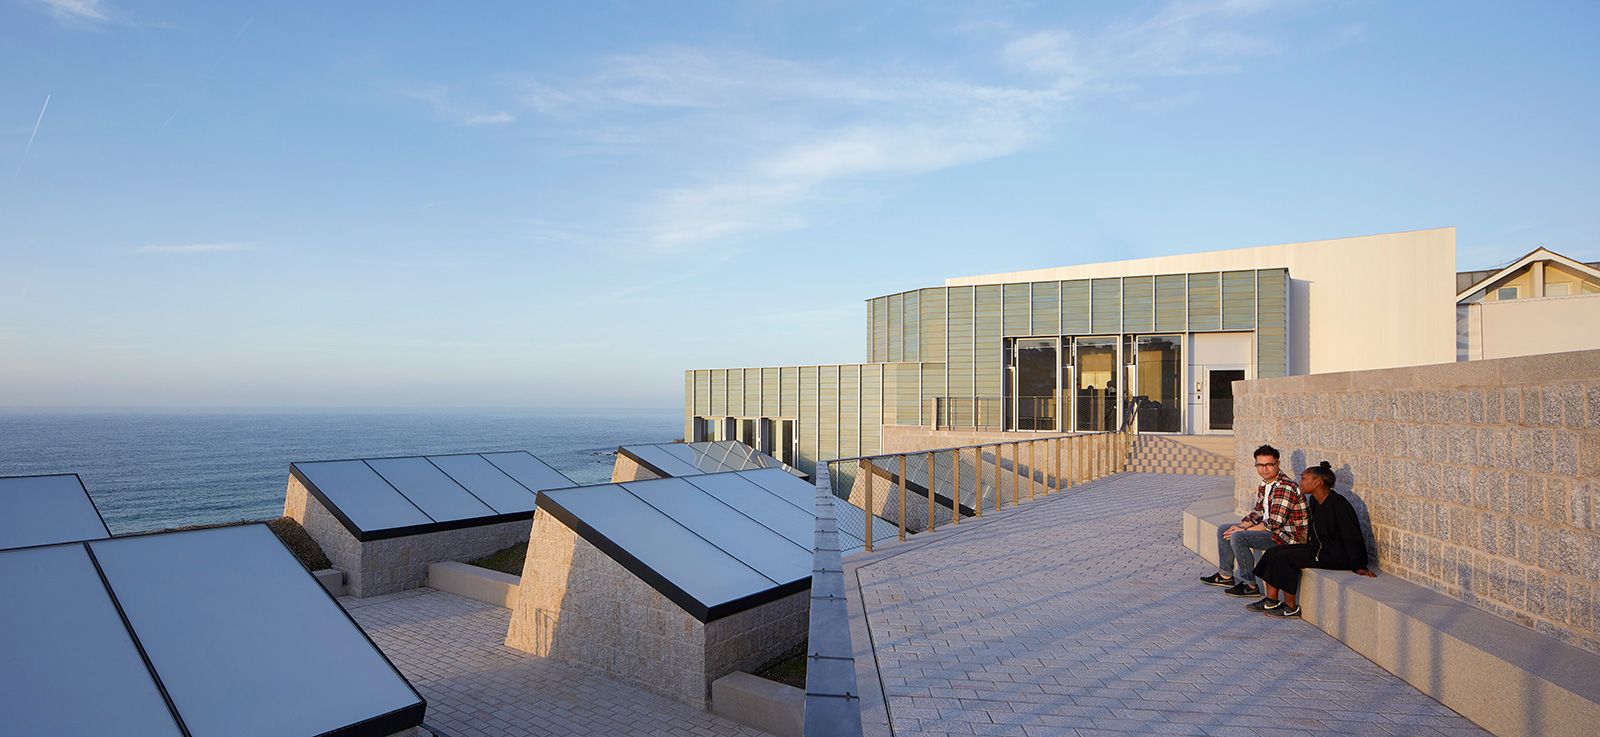 Tate St Ives by Jamie Fobert Architects Photography: Hufton+Crow (c)